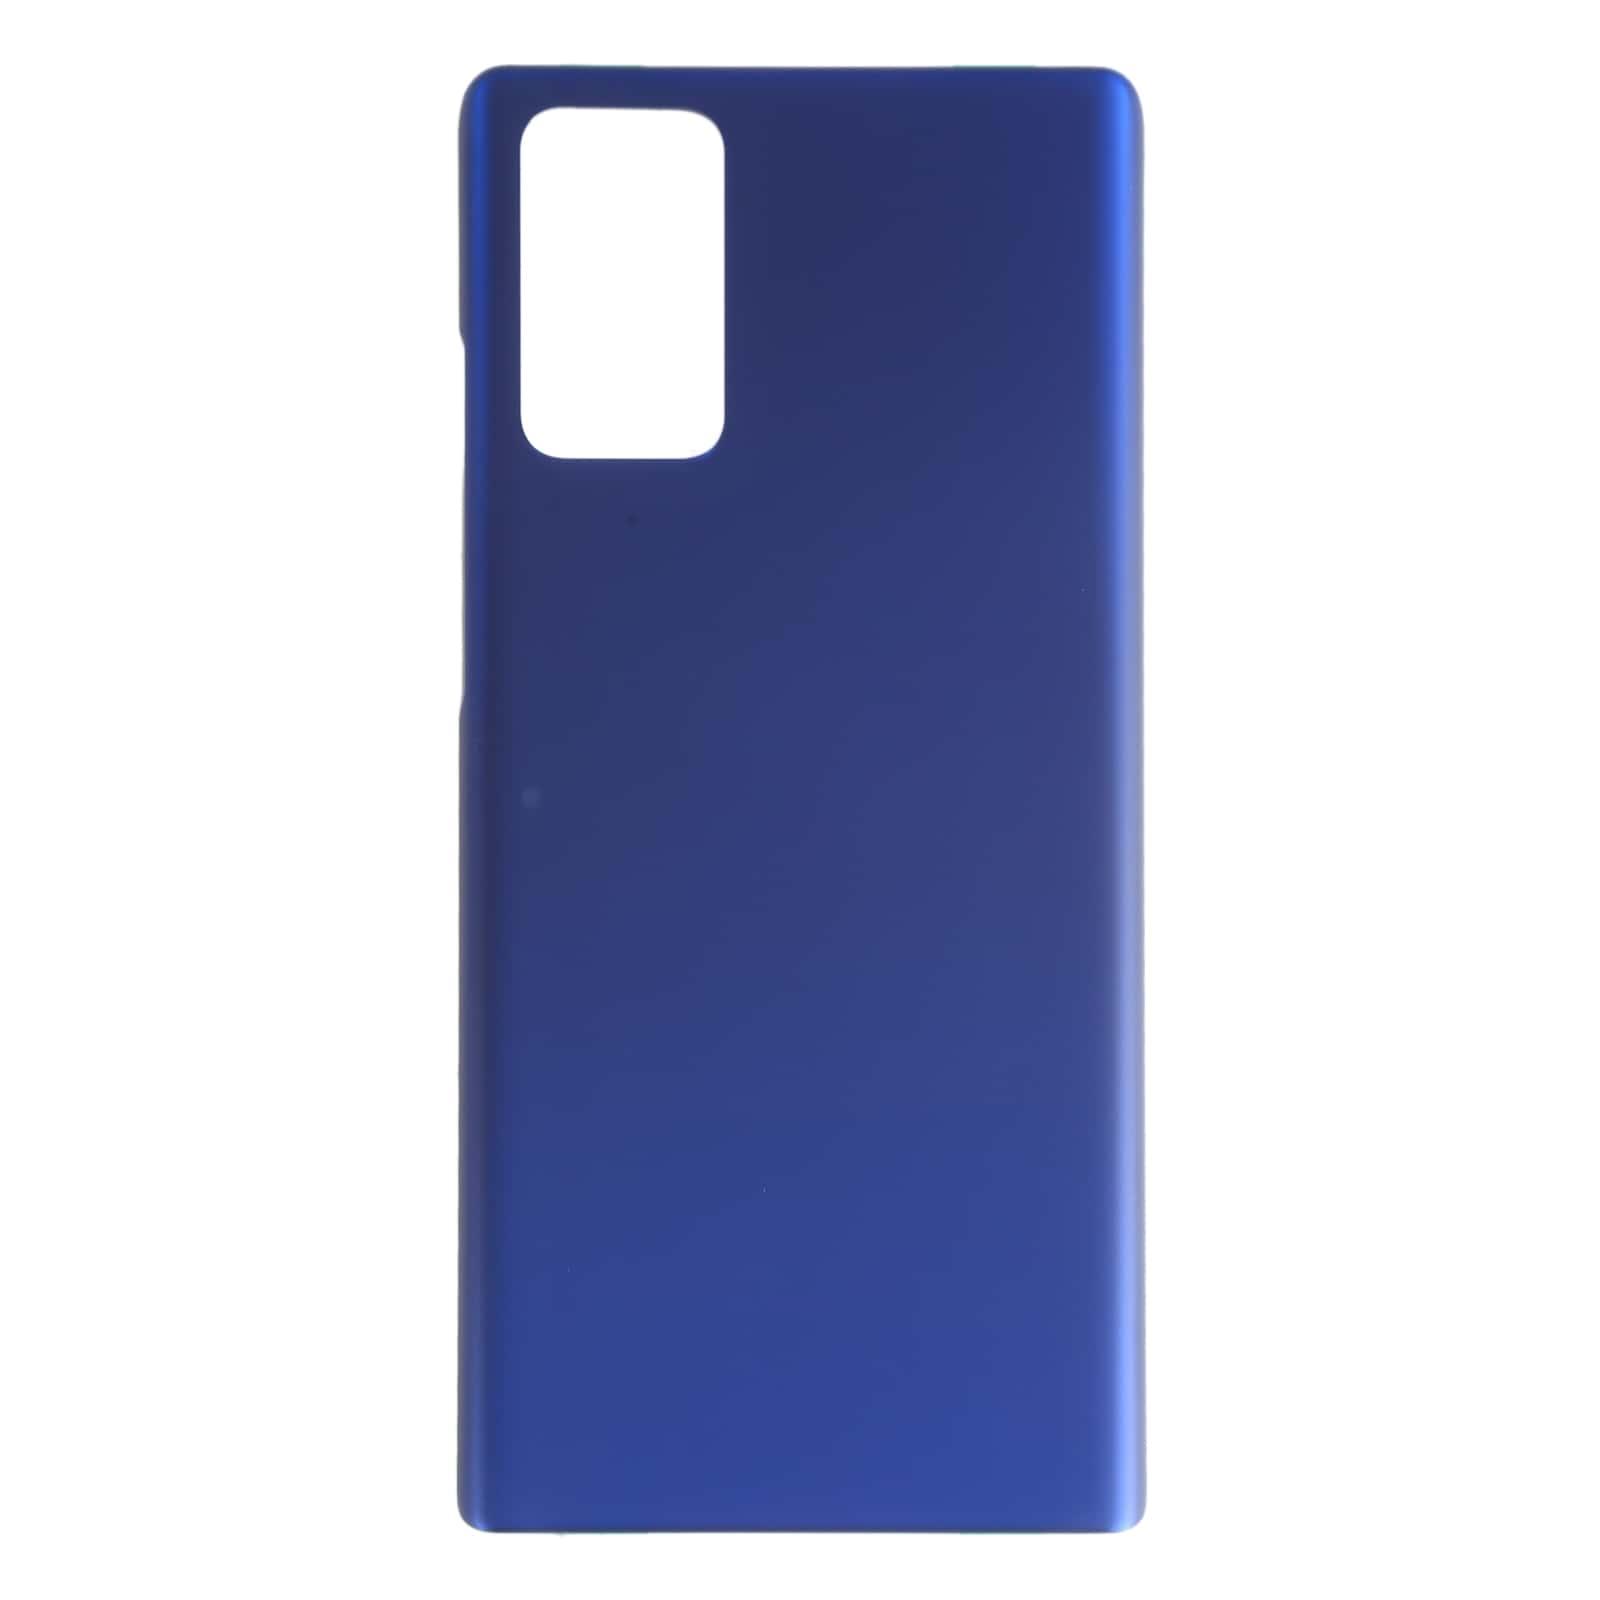 Back Glass Panel for  Samsung Galaxy Note20 Blue